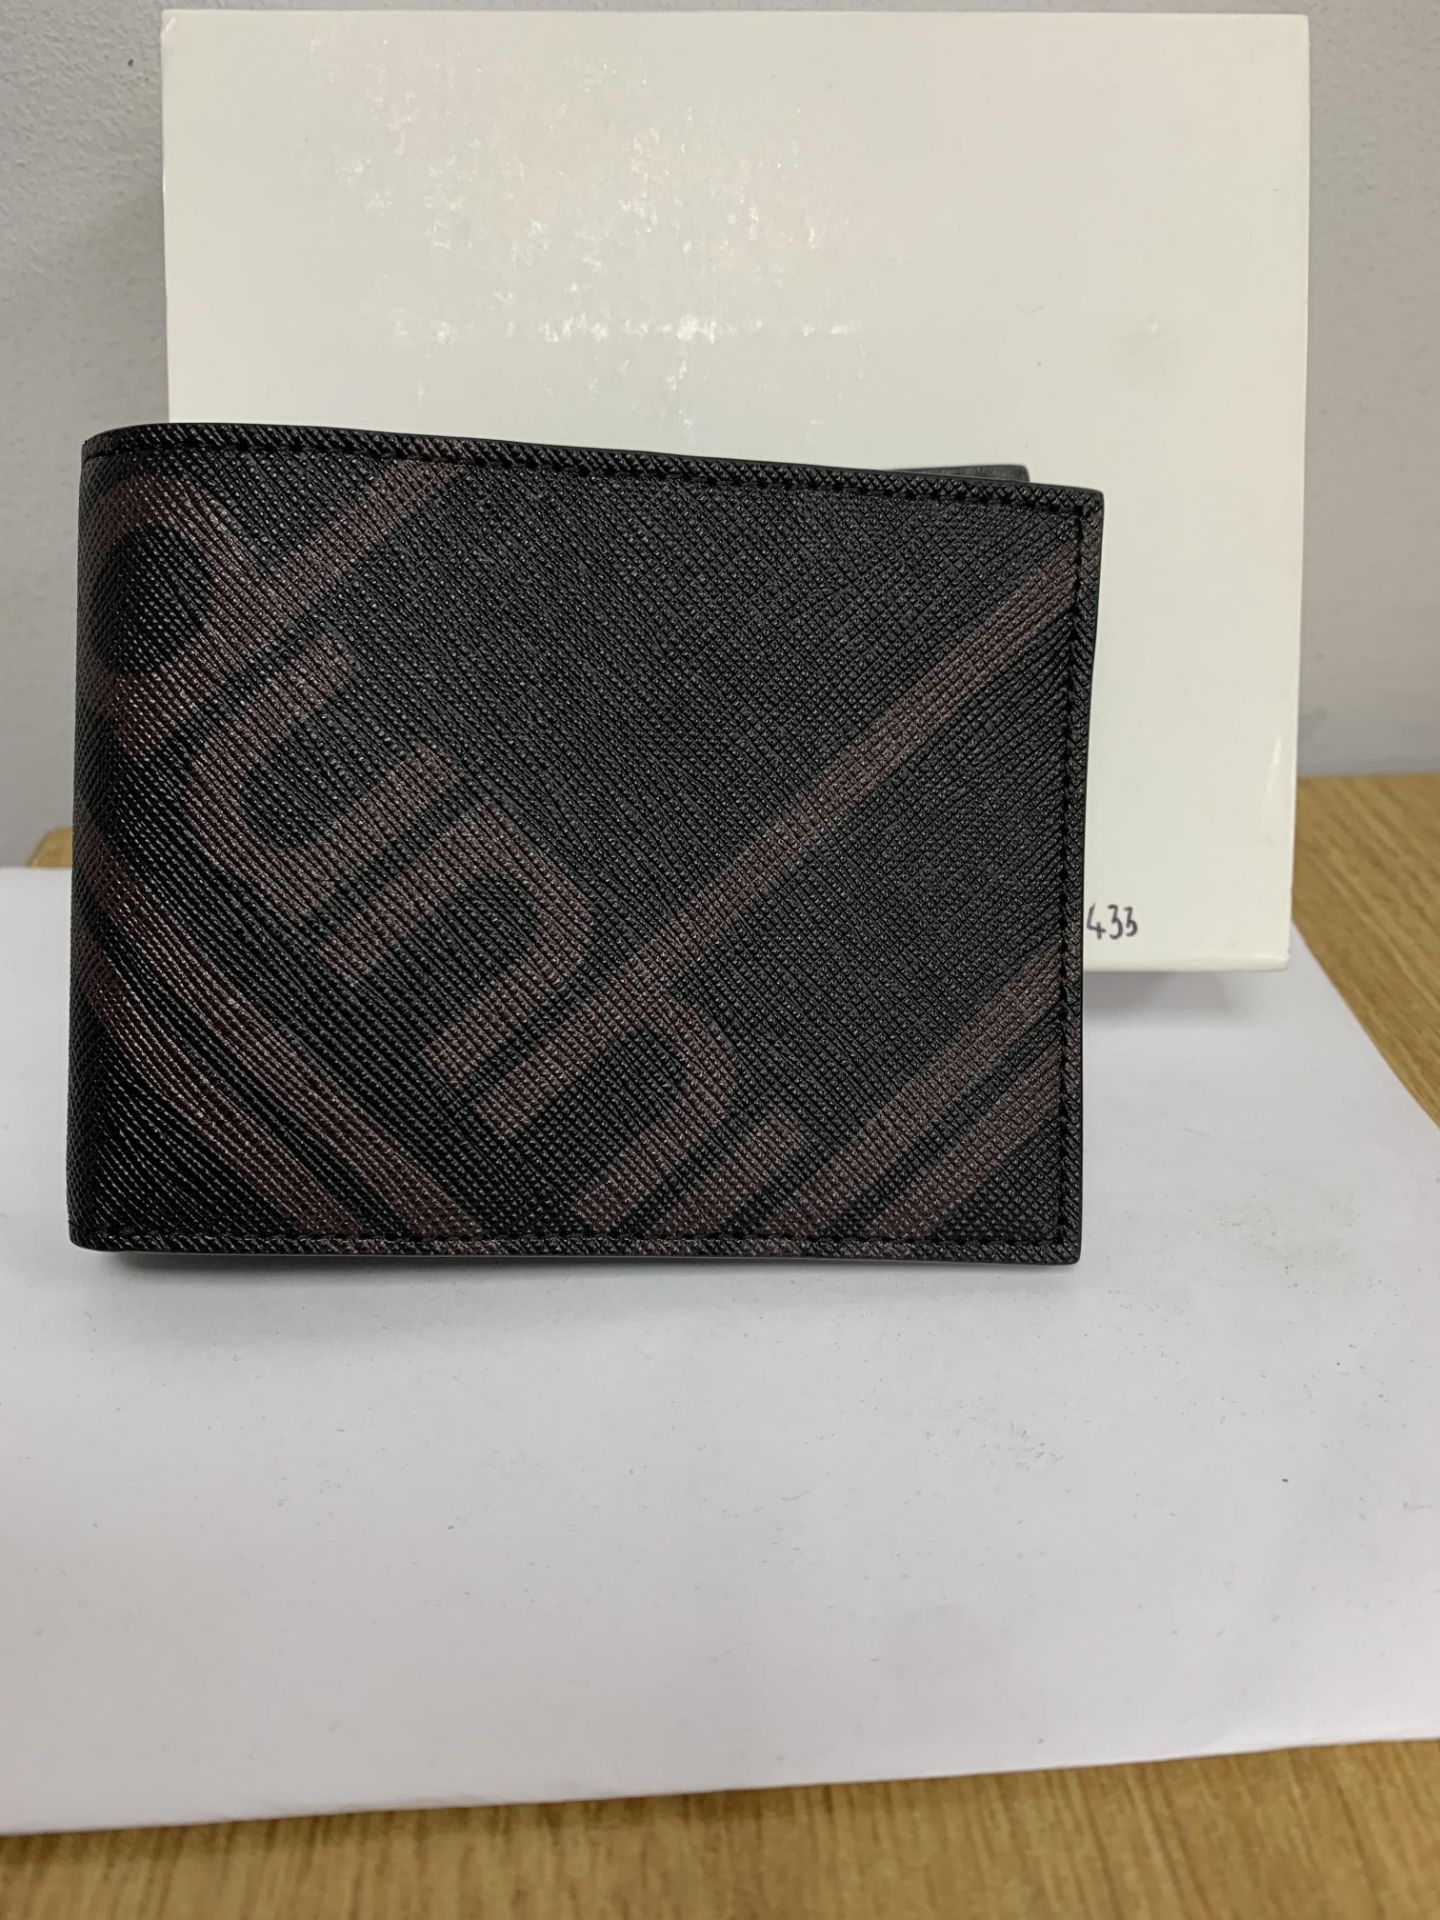 BRAND NEW ALFRED DUNHILL Gt Dunhill L Canvas 6Cc Billfo, BLACK (433) RRP £229 - 1